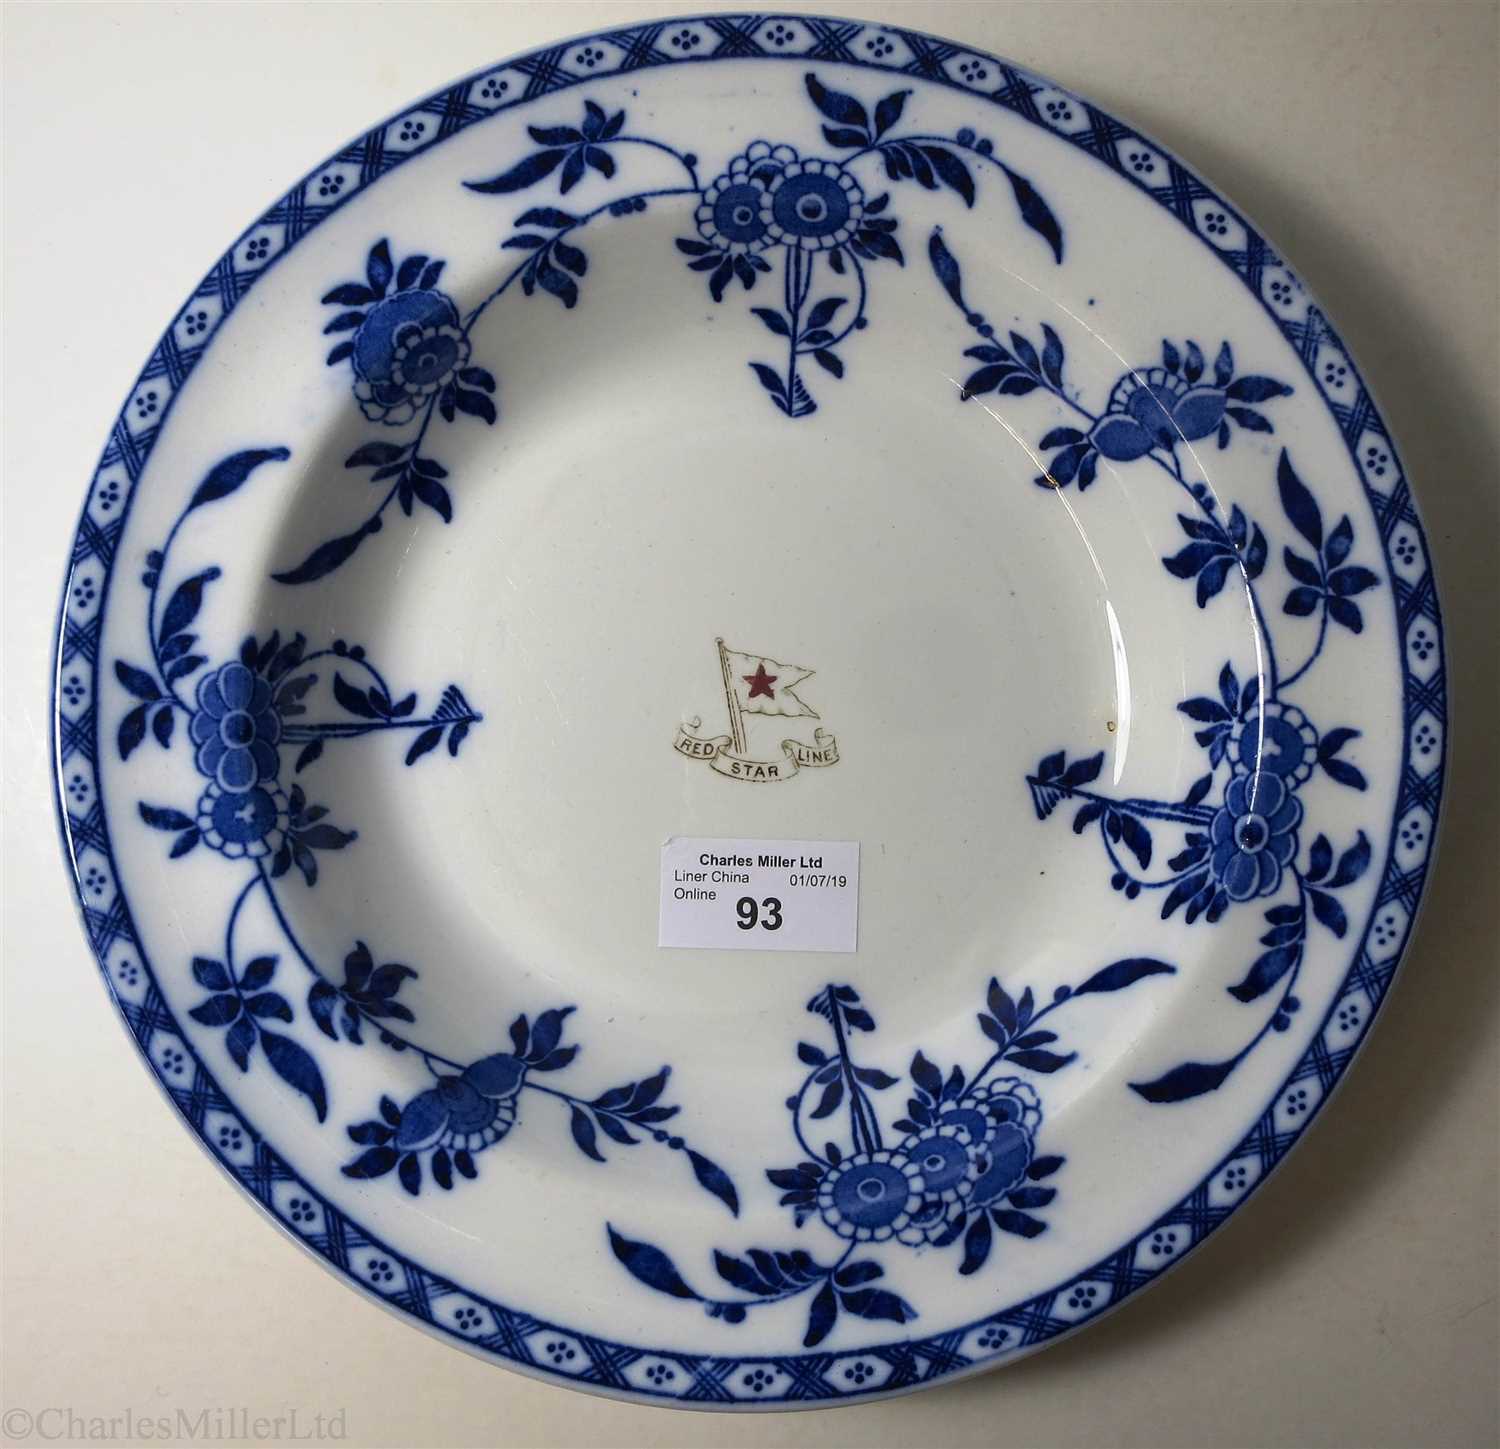 Lot 93 - RED STAR LINE: A SECOND-CLASS CHINA ‘BLUE DELFT’ PATTERN SOUP PLATE BY MINTON, ENGLAND, 1920-1951